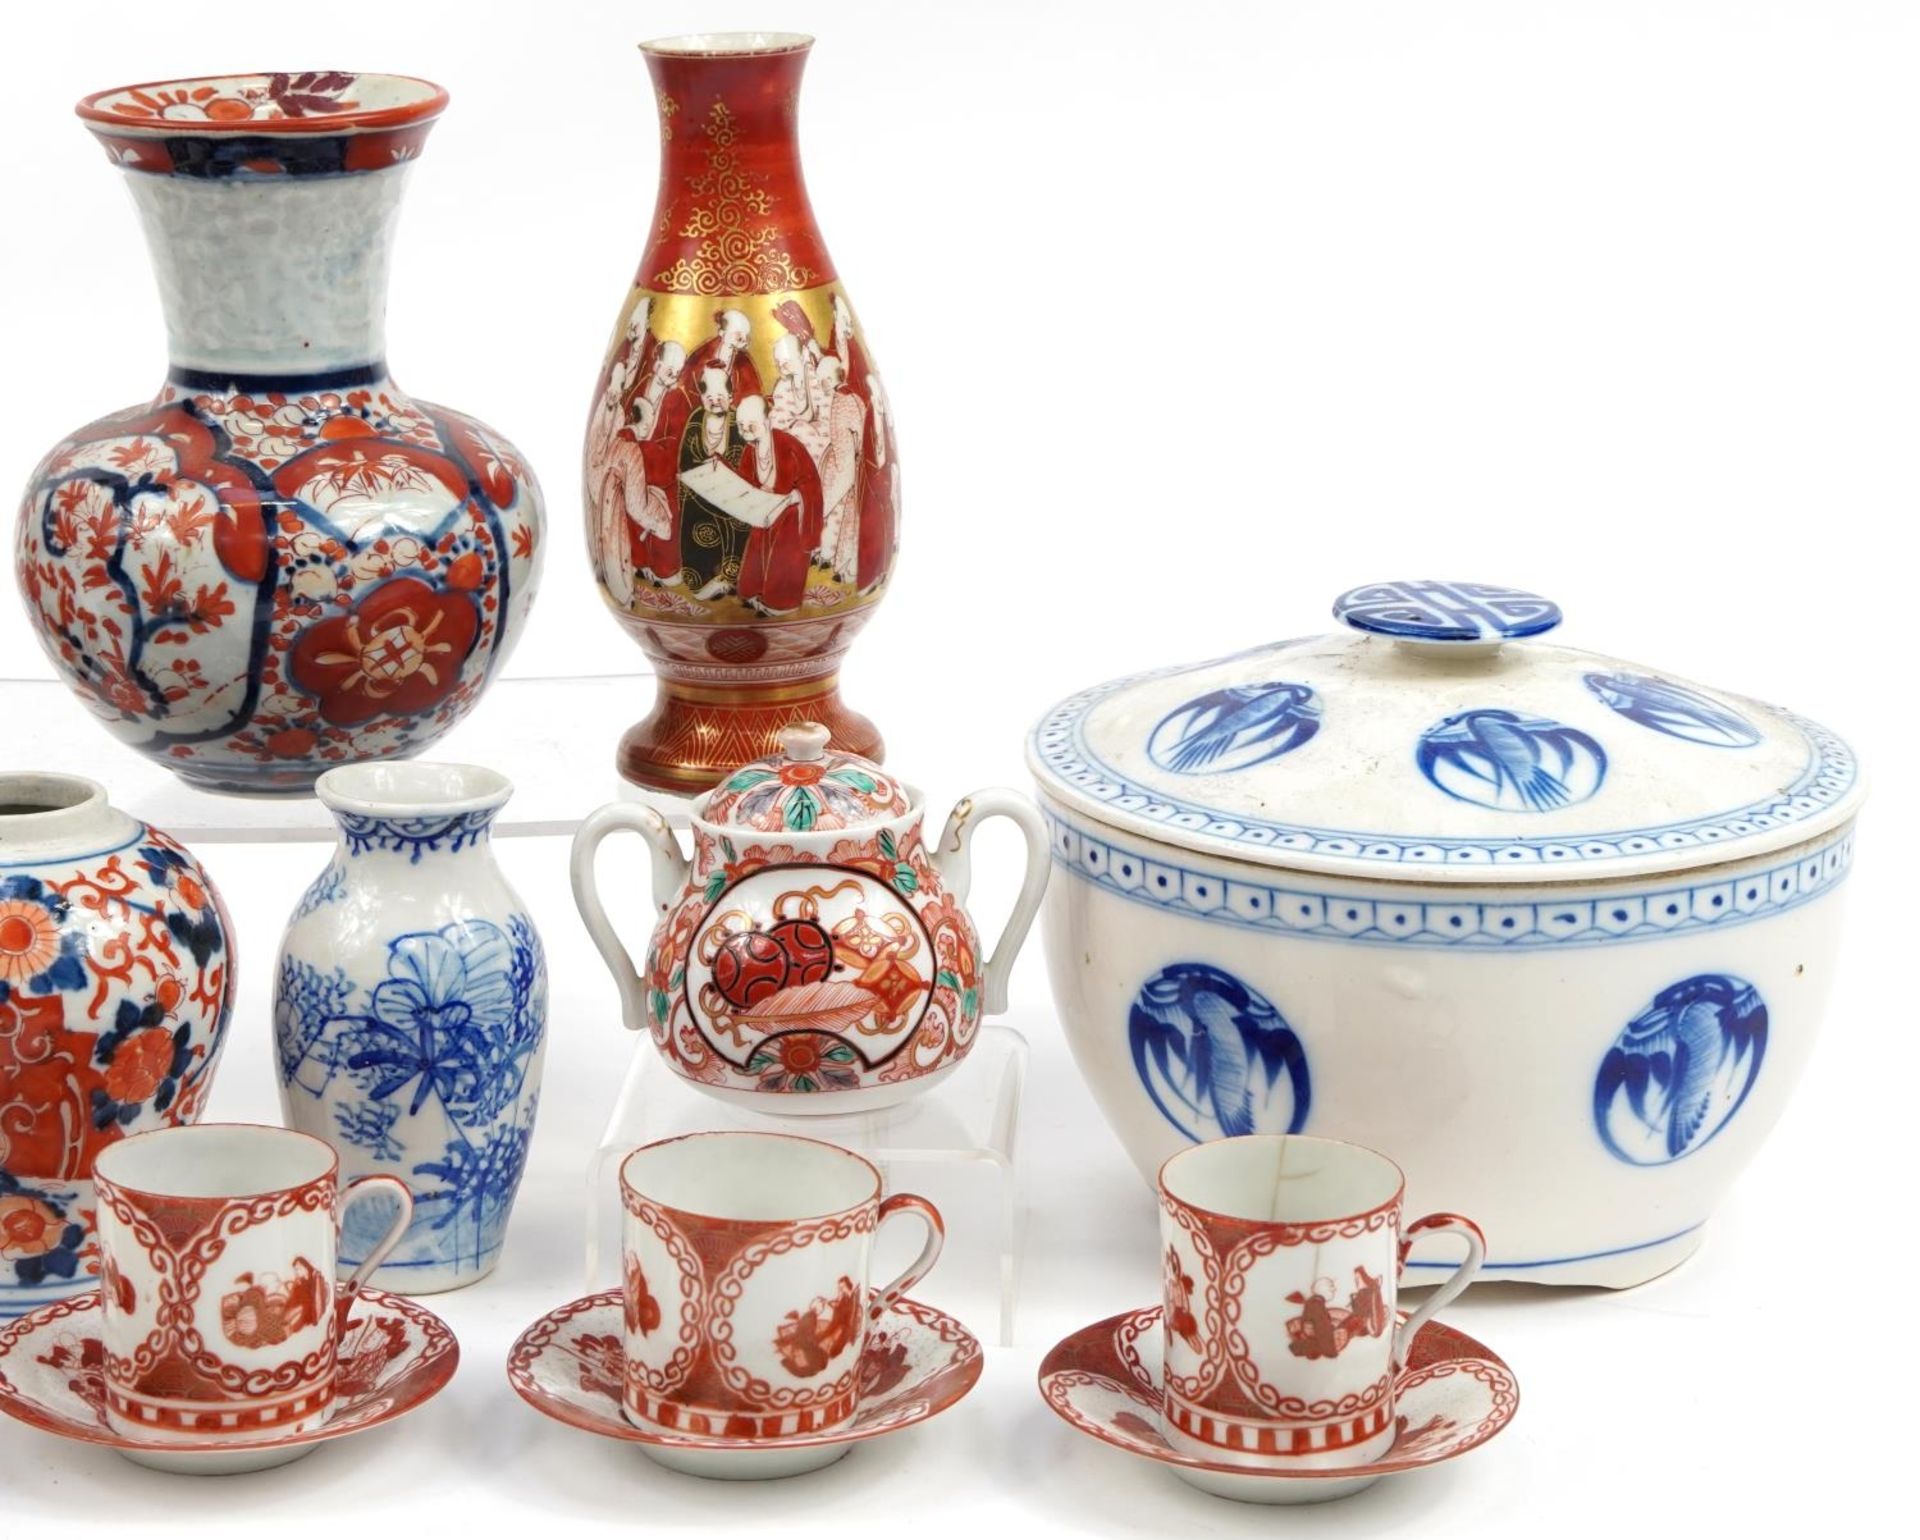 Japanese porcelain including Kutani coffee cans and Imari vases, the largest 22cm in diameter - Image 3 of 3